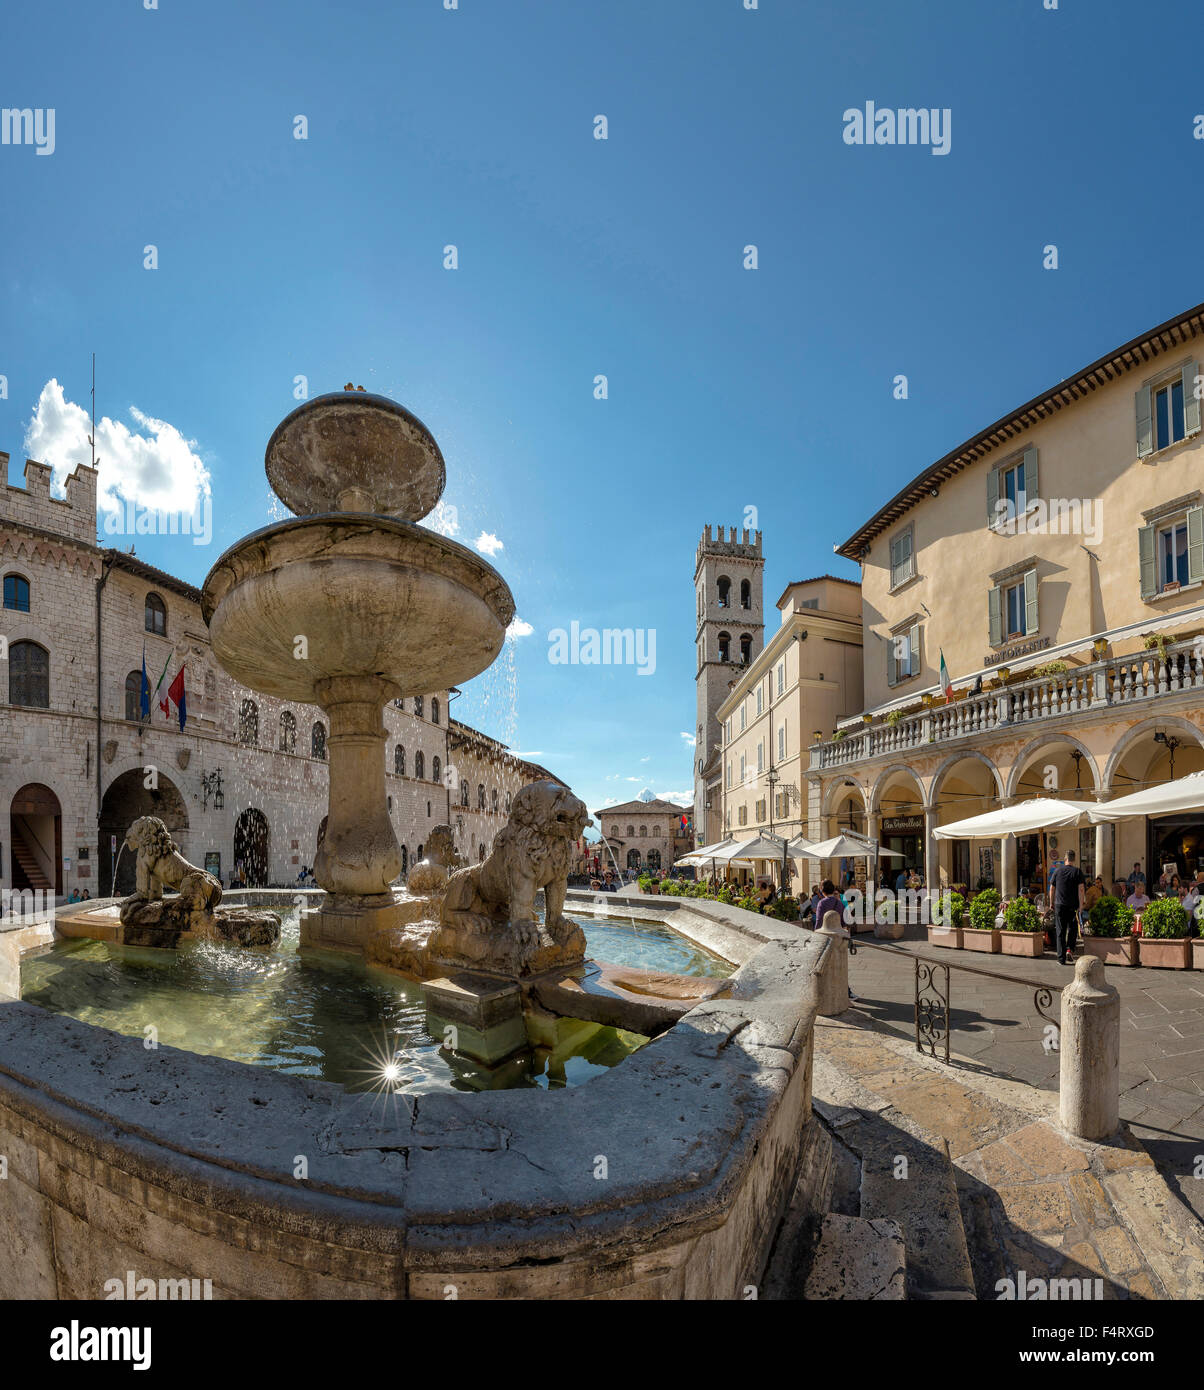 Italy, Europe, Assisi, Umbria, Piazza del Comune, village, water, spring, people, fountain, Stock Photo